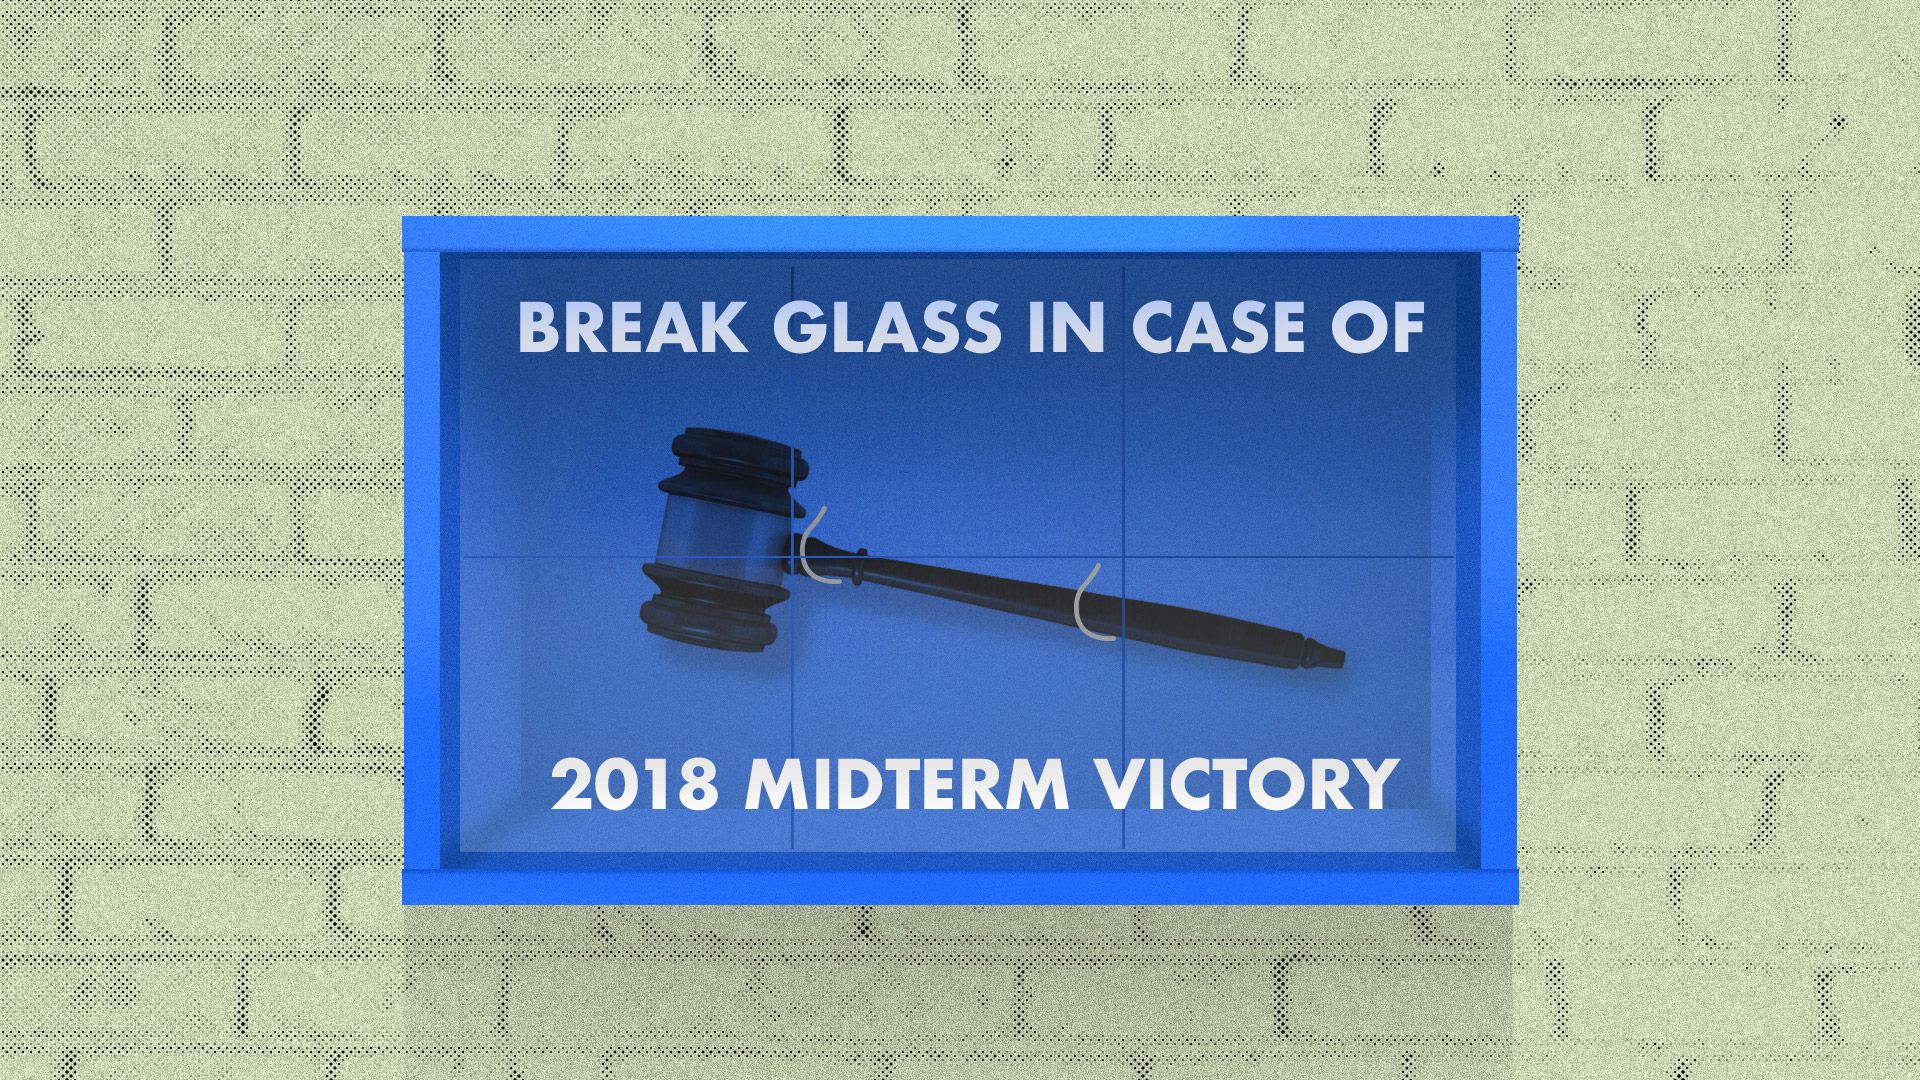 This shows "Break glass in case of 2018 emergency" with a gavel behind glass